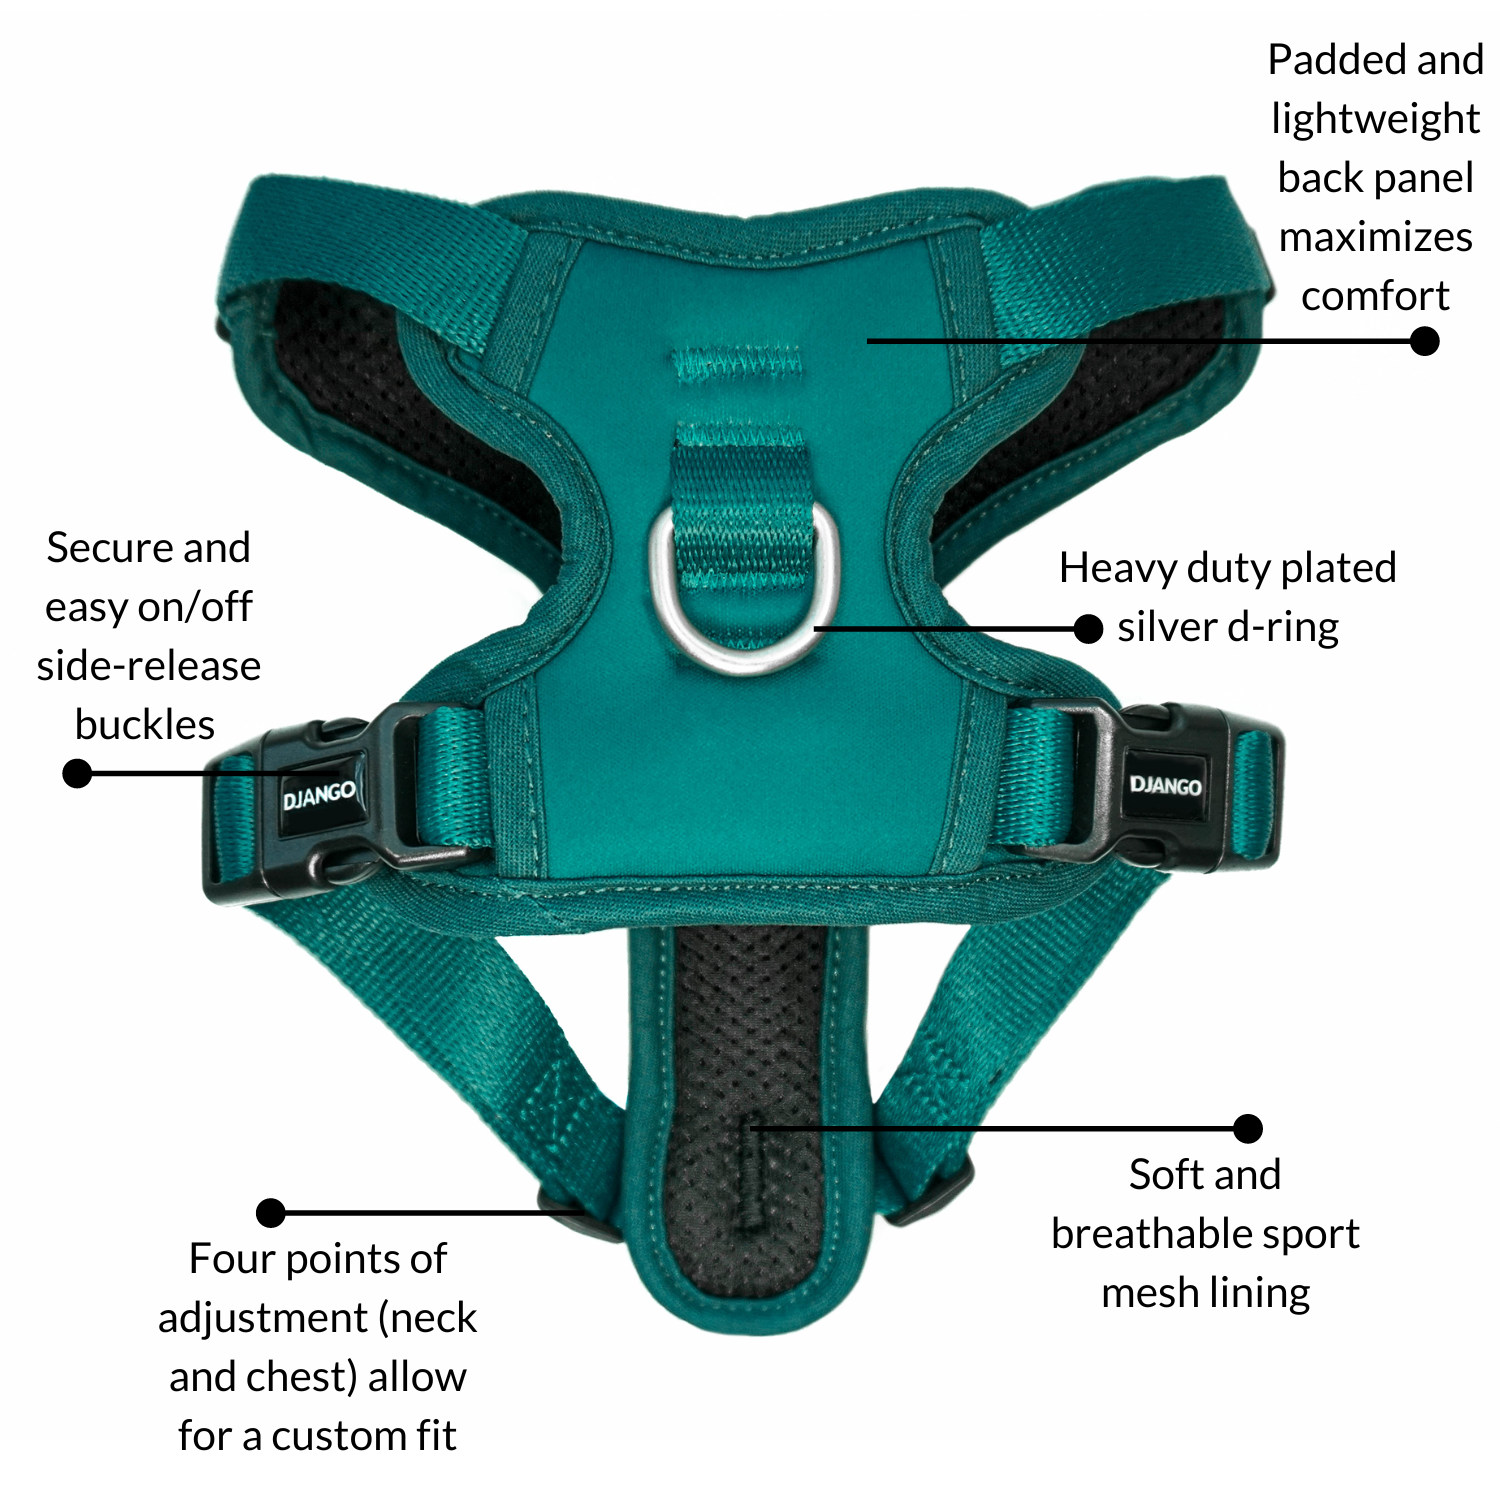 DJANGO Tahoe No Pull Dog Harness in Dark Teal Green - Additional features include a padded and lightweight back panel for added comfort, soft and breathable mesh lining, four points of adjustment, secure and easy on/off buckles, and heavy duty plated silver hardware. - djangobrand.com